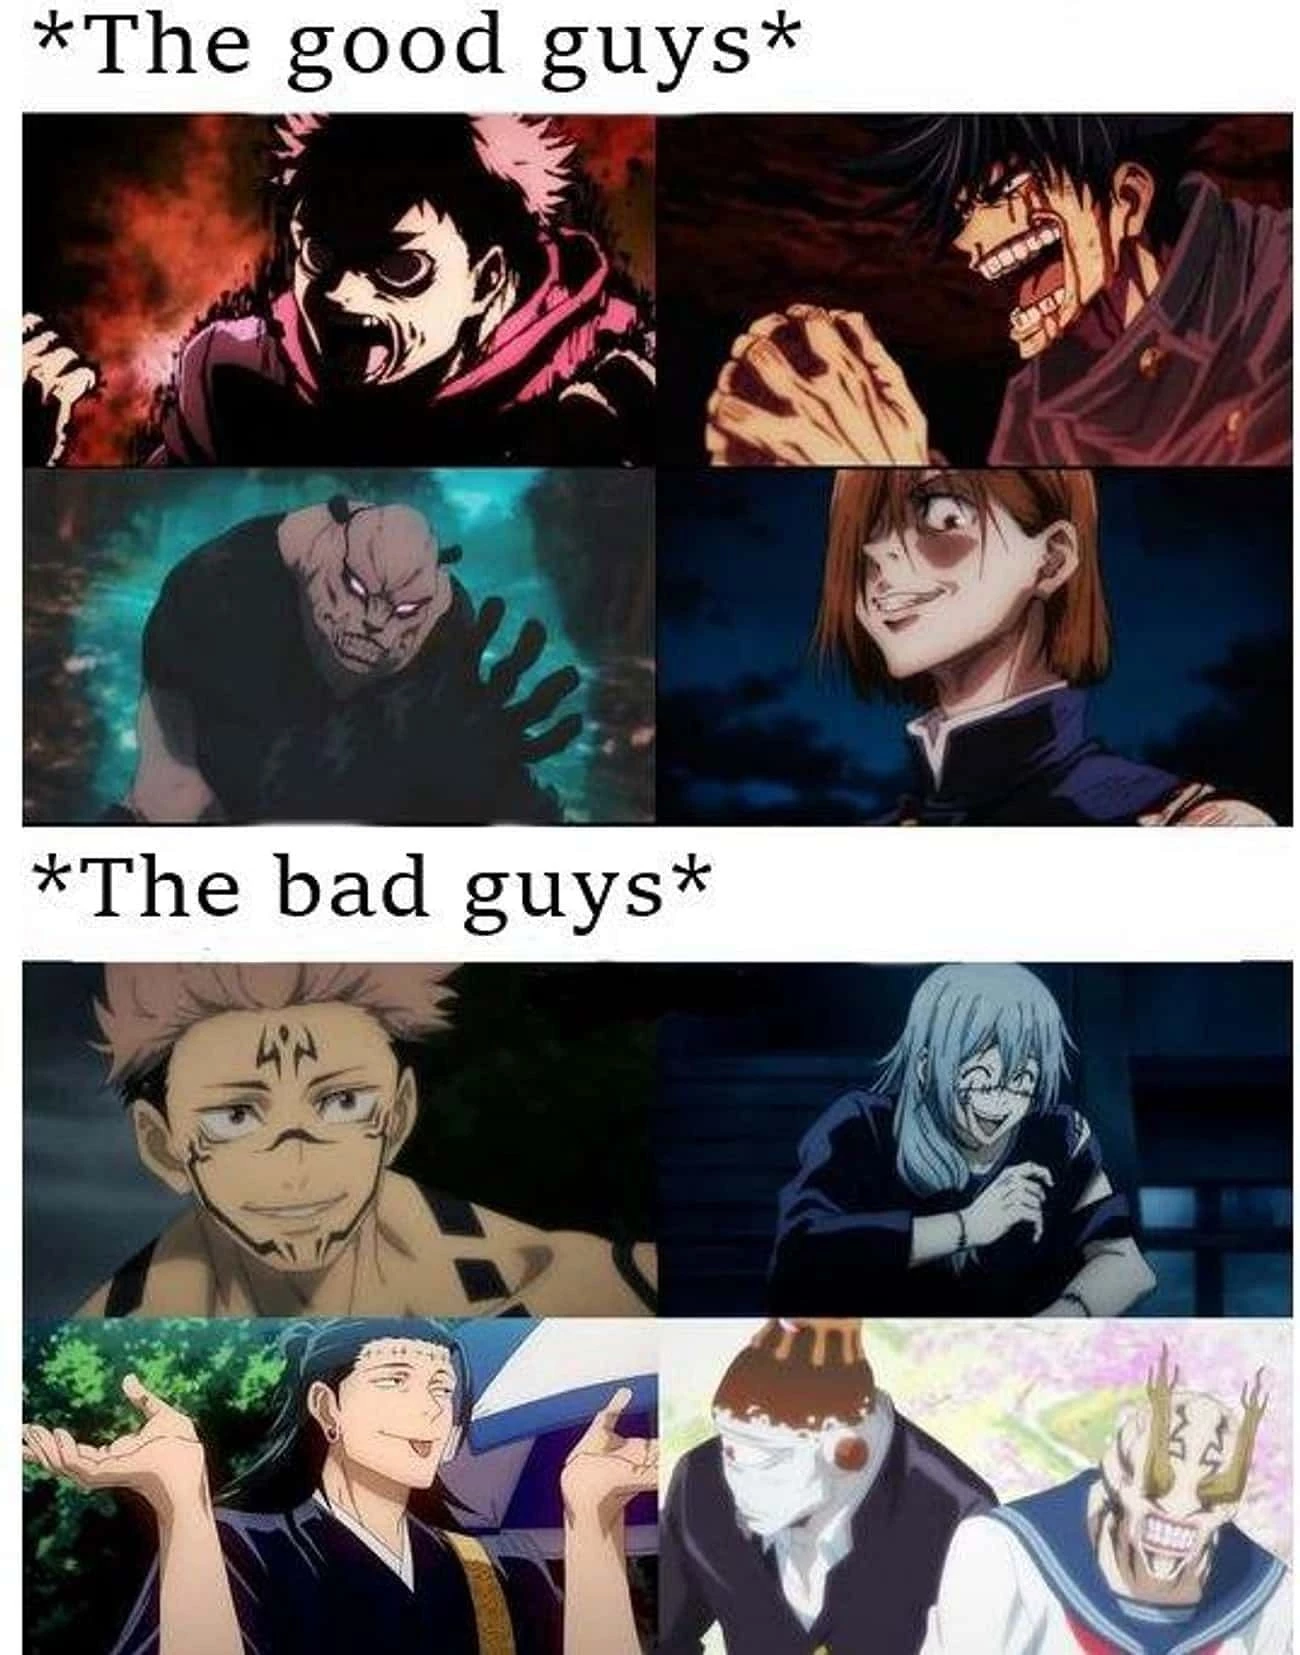 Sometimes In Anime, The Good Guys Look Way Scarier Than The Villains